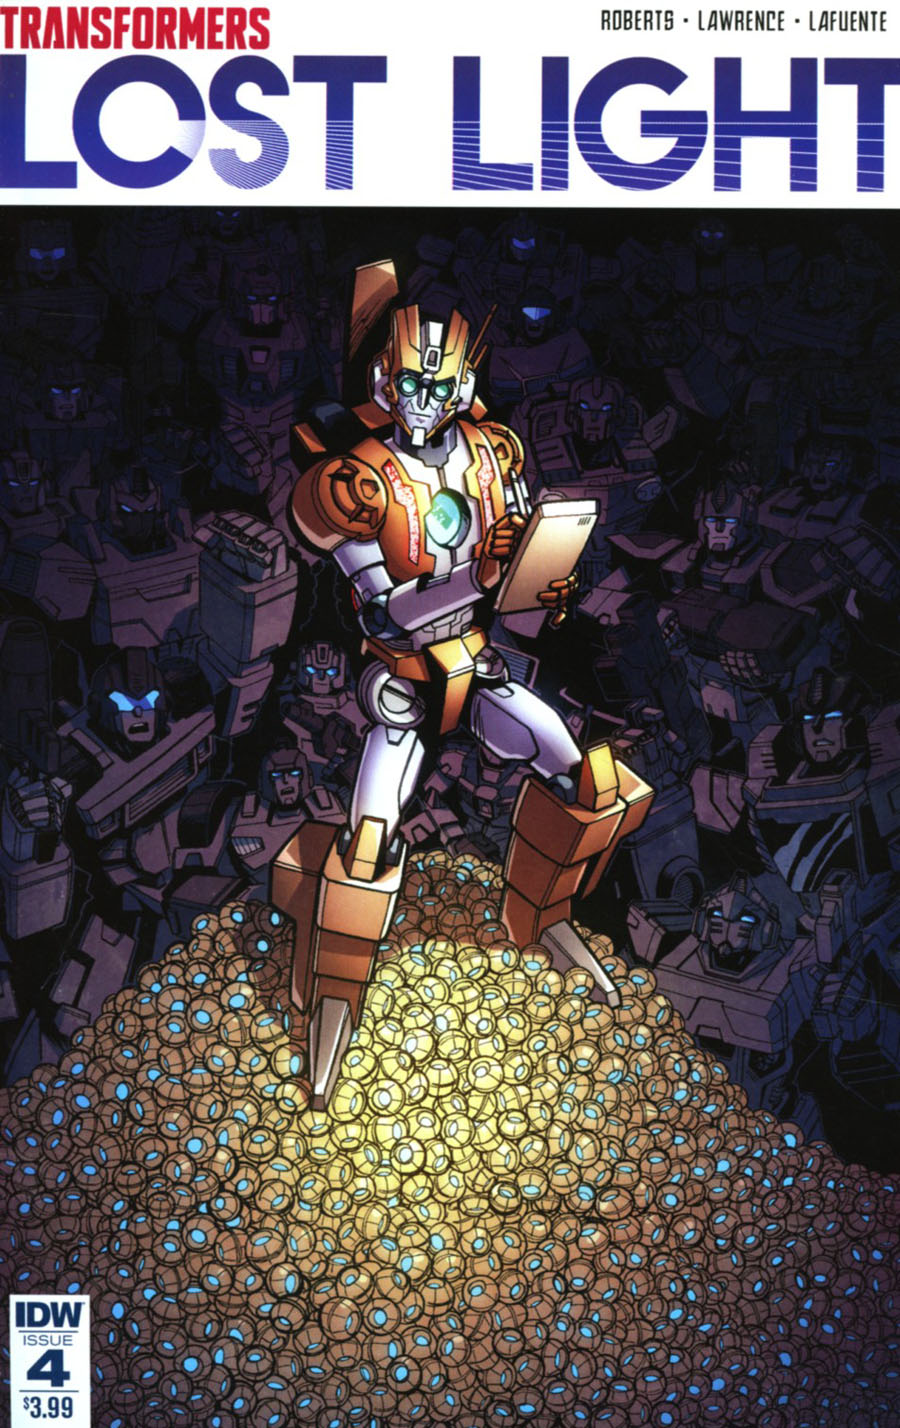 Transformers Lost Light #4 Cover A Regular Jack Lawrence Cover